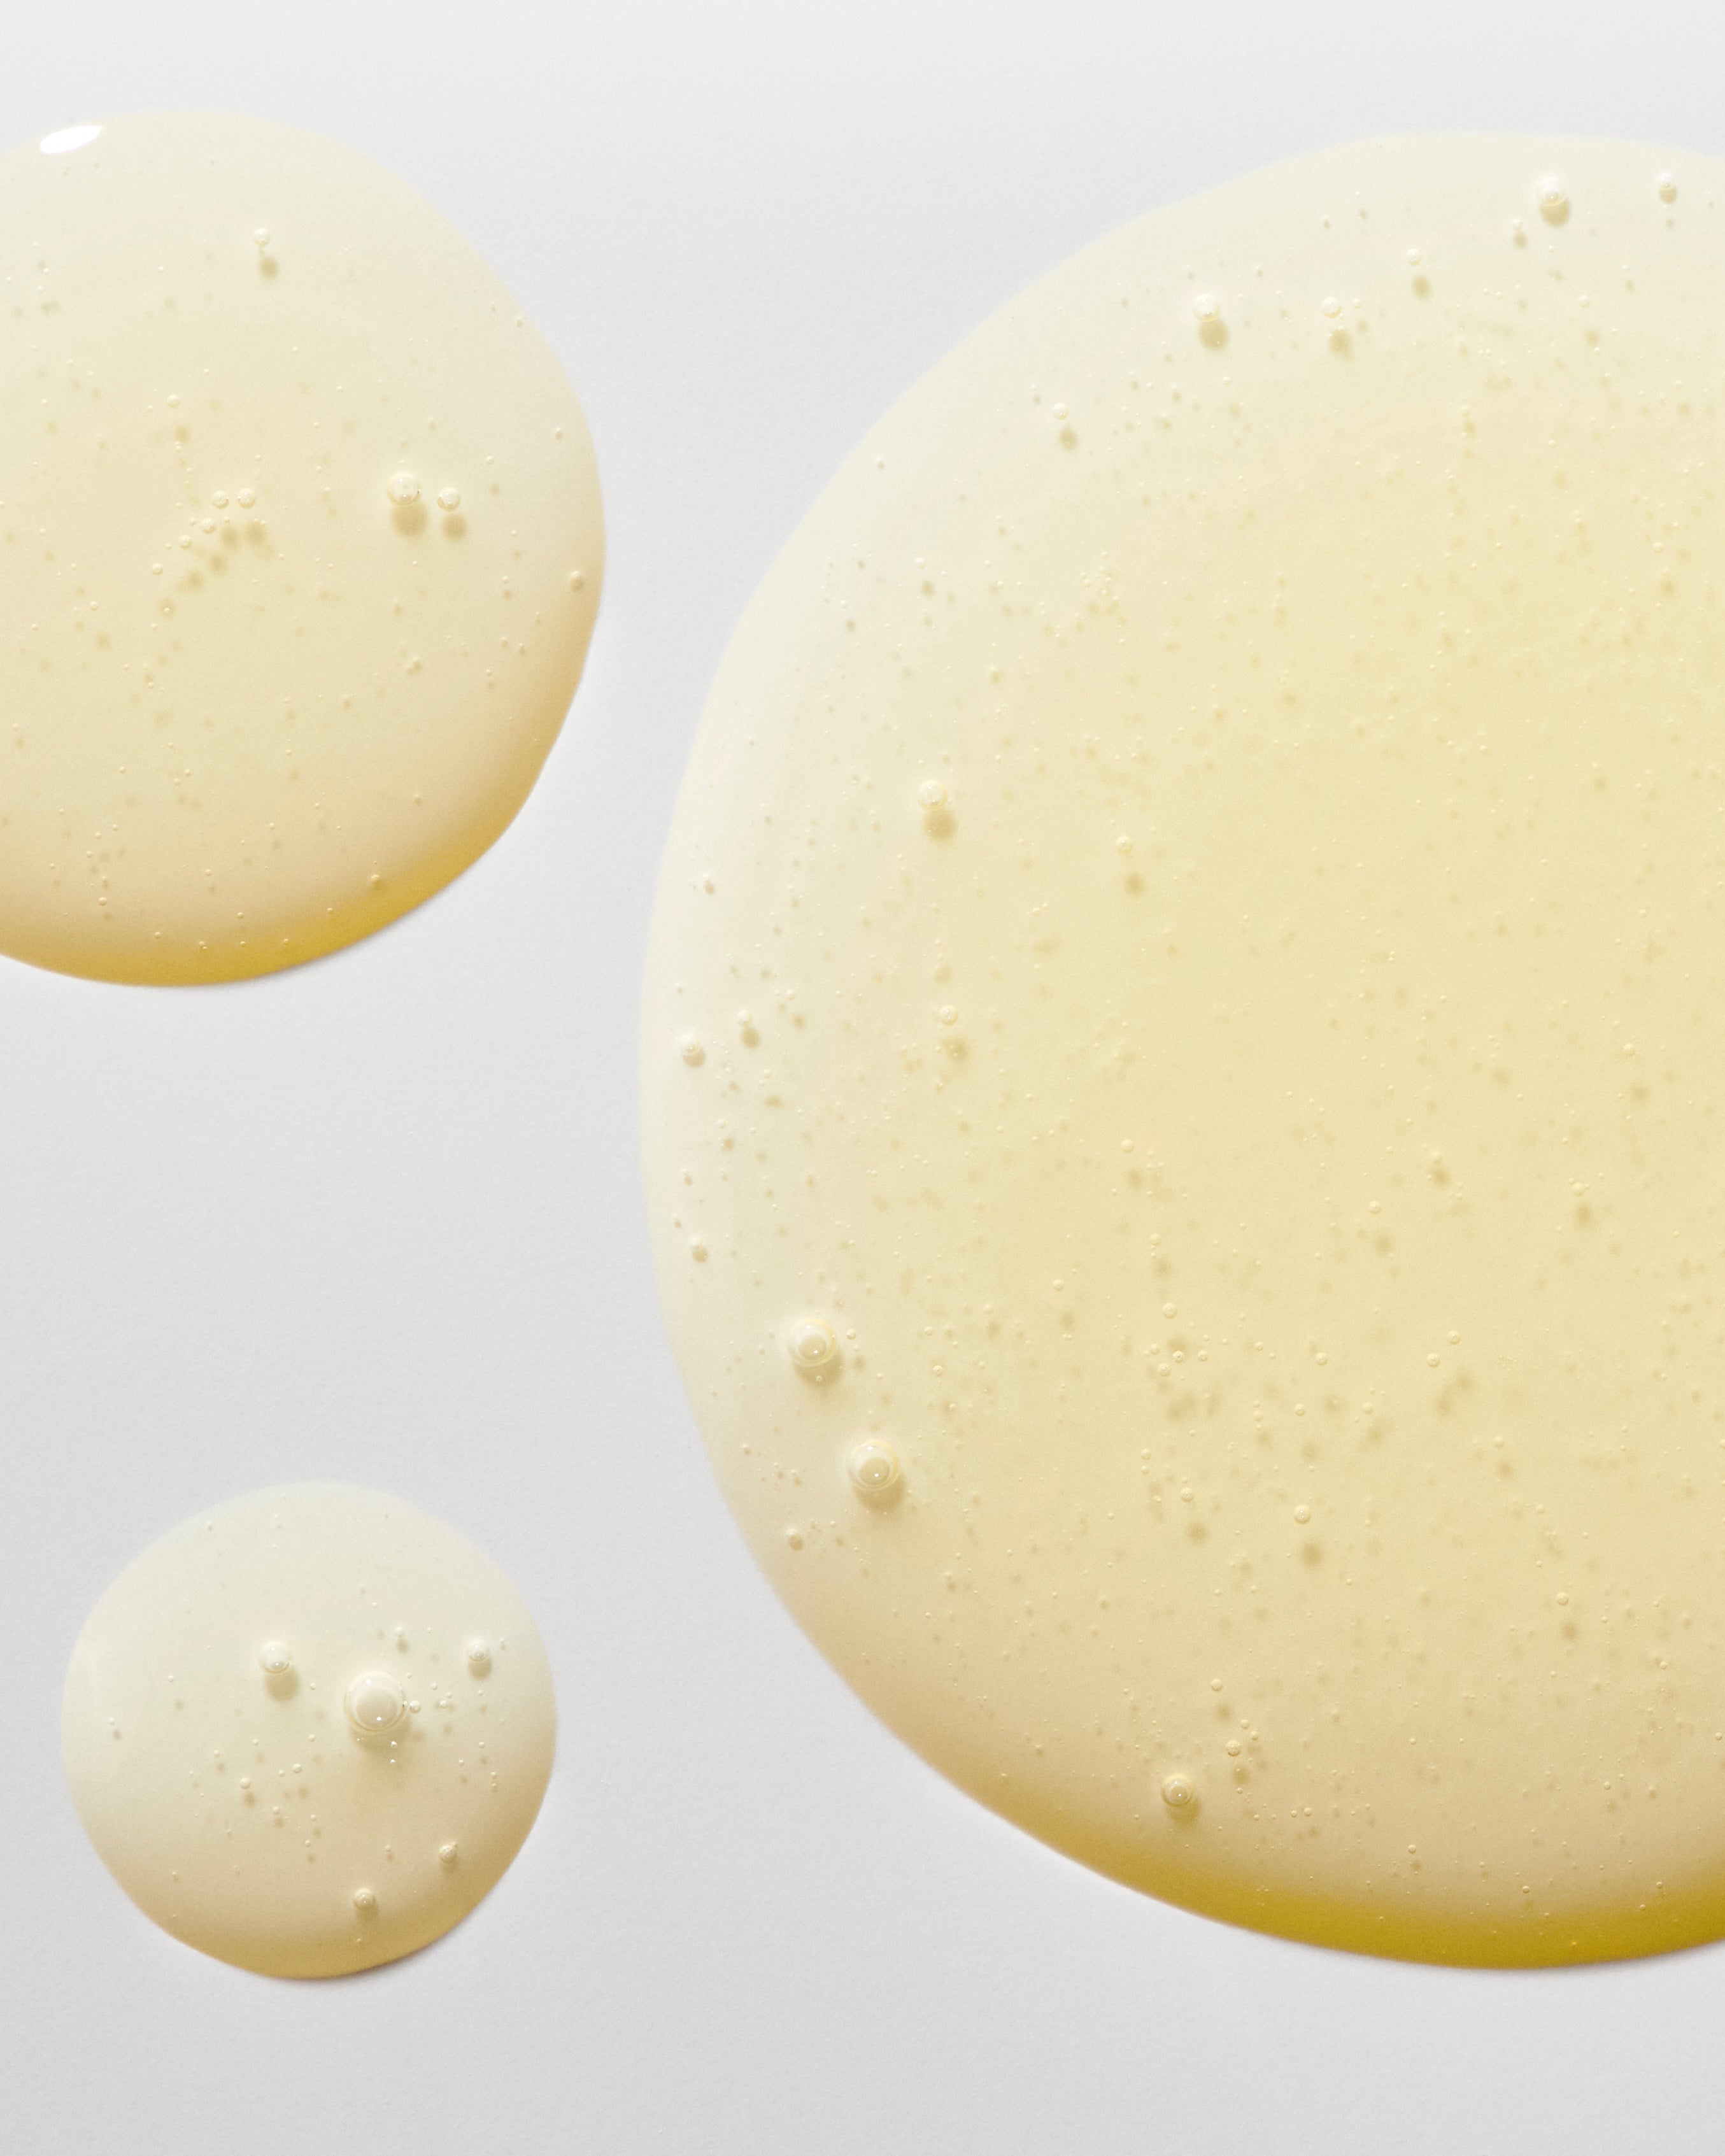 Close-up image of three translucent, amber-colored drops of Freaks of Nature Skincare Daily System on a light background. The slightly viscous drops, enriched with SPF30 Sunscreen and vegan Squalane, contain tiny air bubbles that create a subtle, uneven surface.